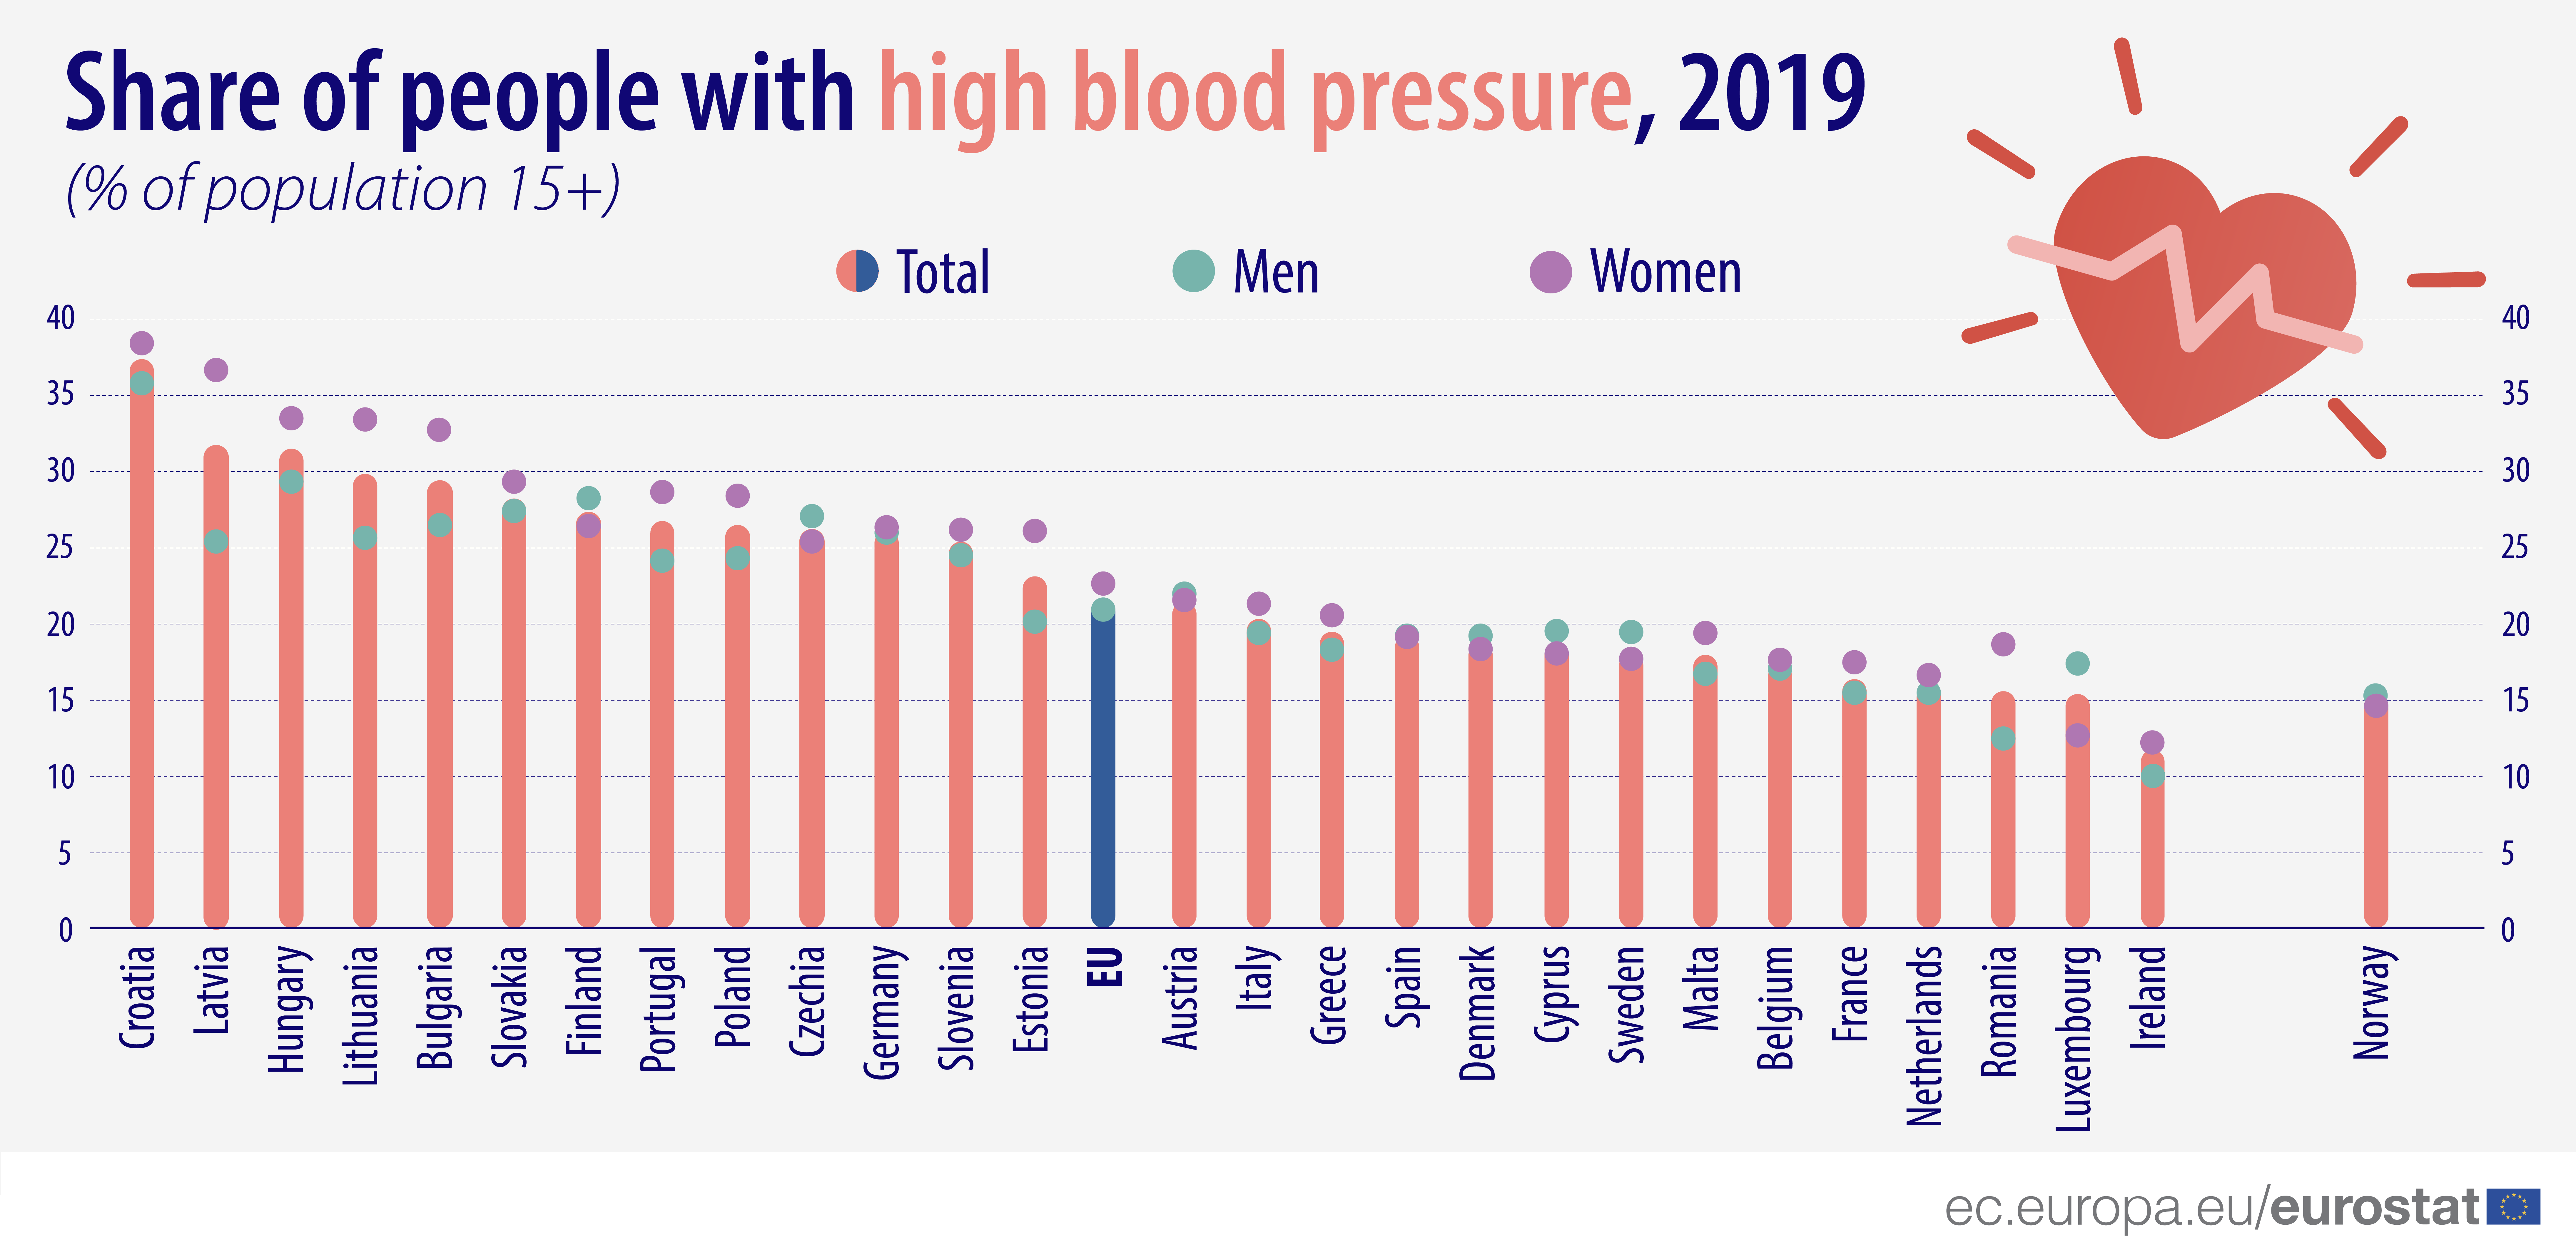 22% of people in the EU have high blood pressure - Products Eurostat News